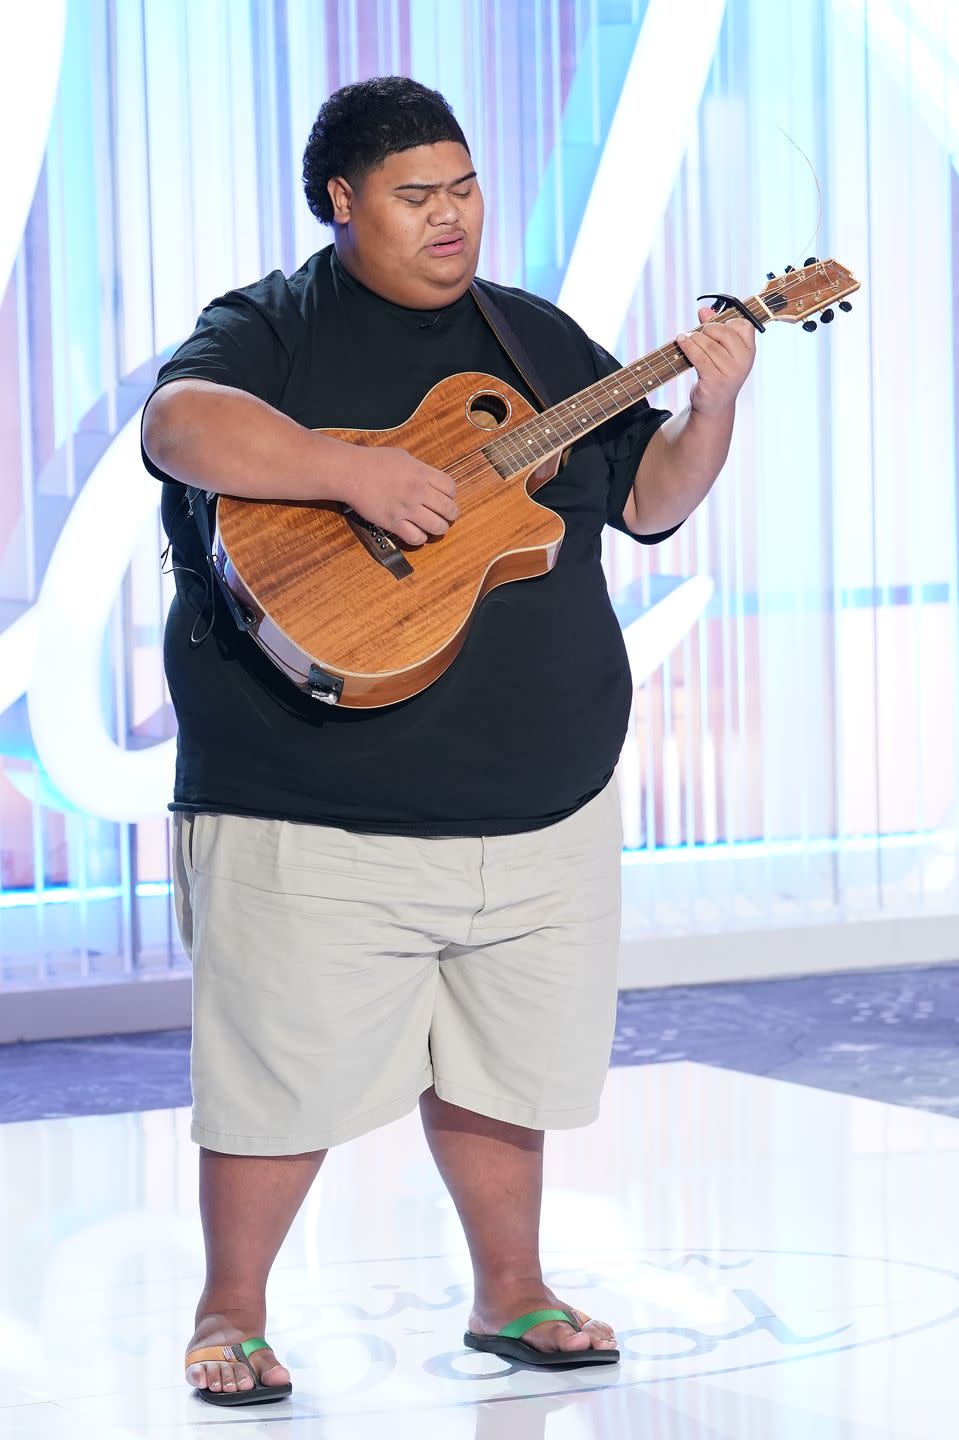 iam tongi playing a guitar while singing in front of an american idol backdrop